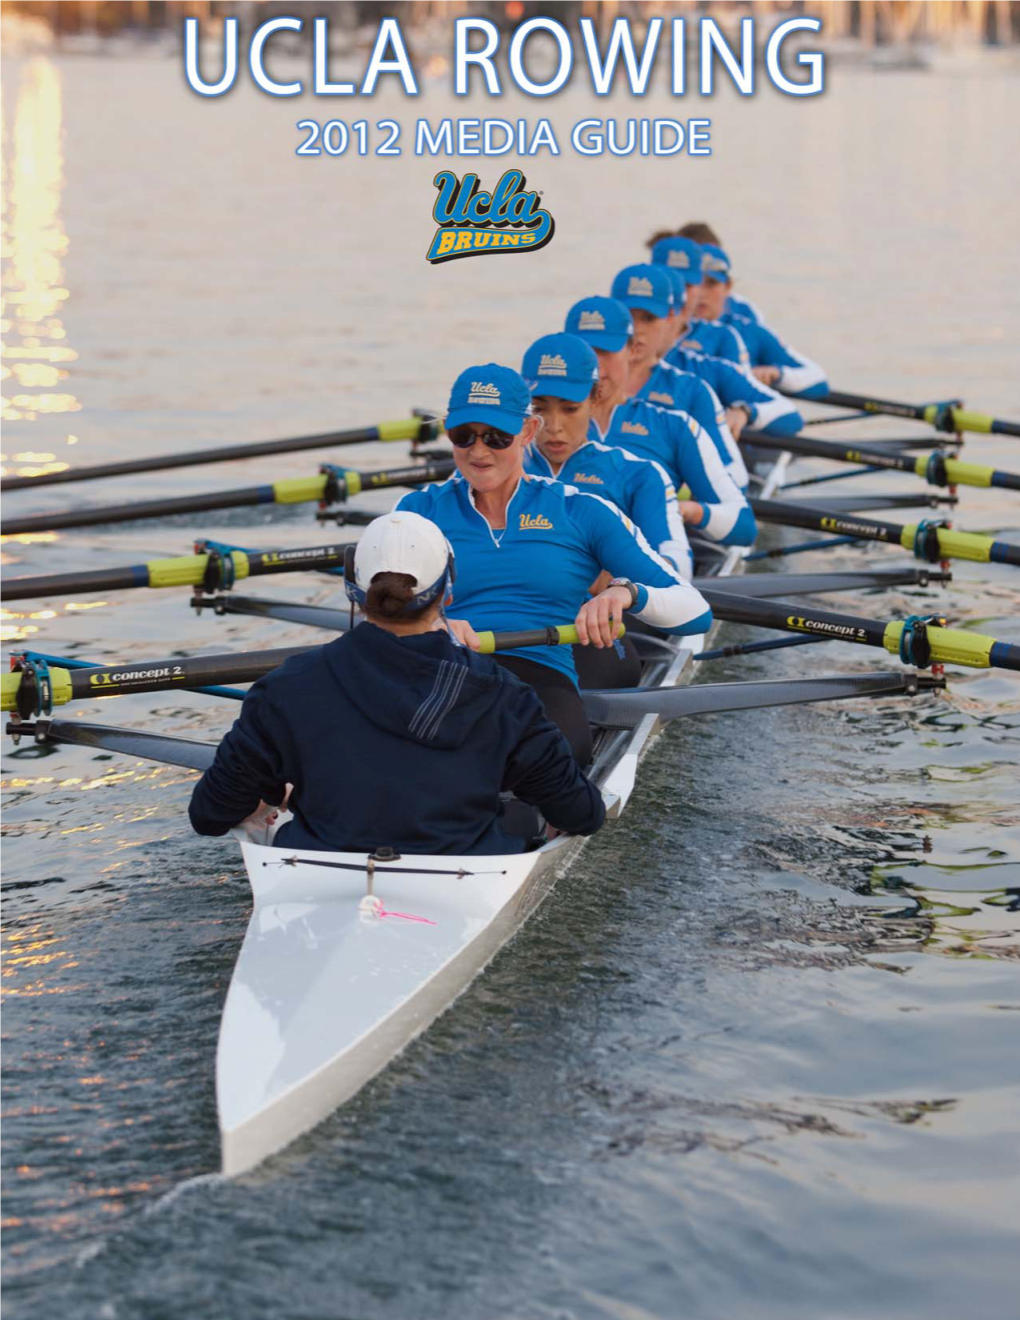 This Is Ucla Rowing